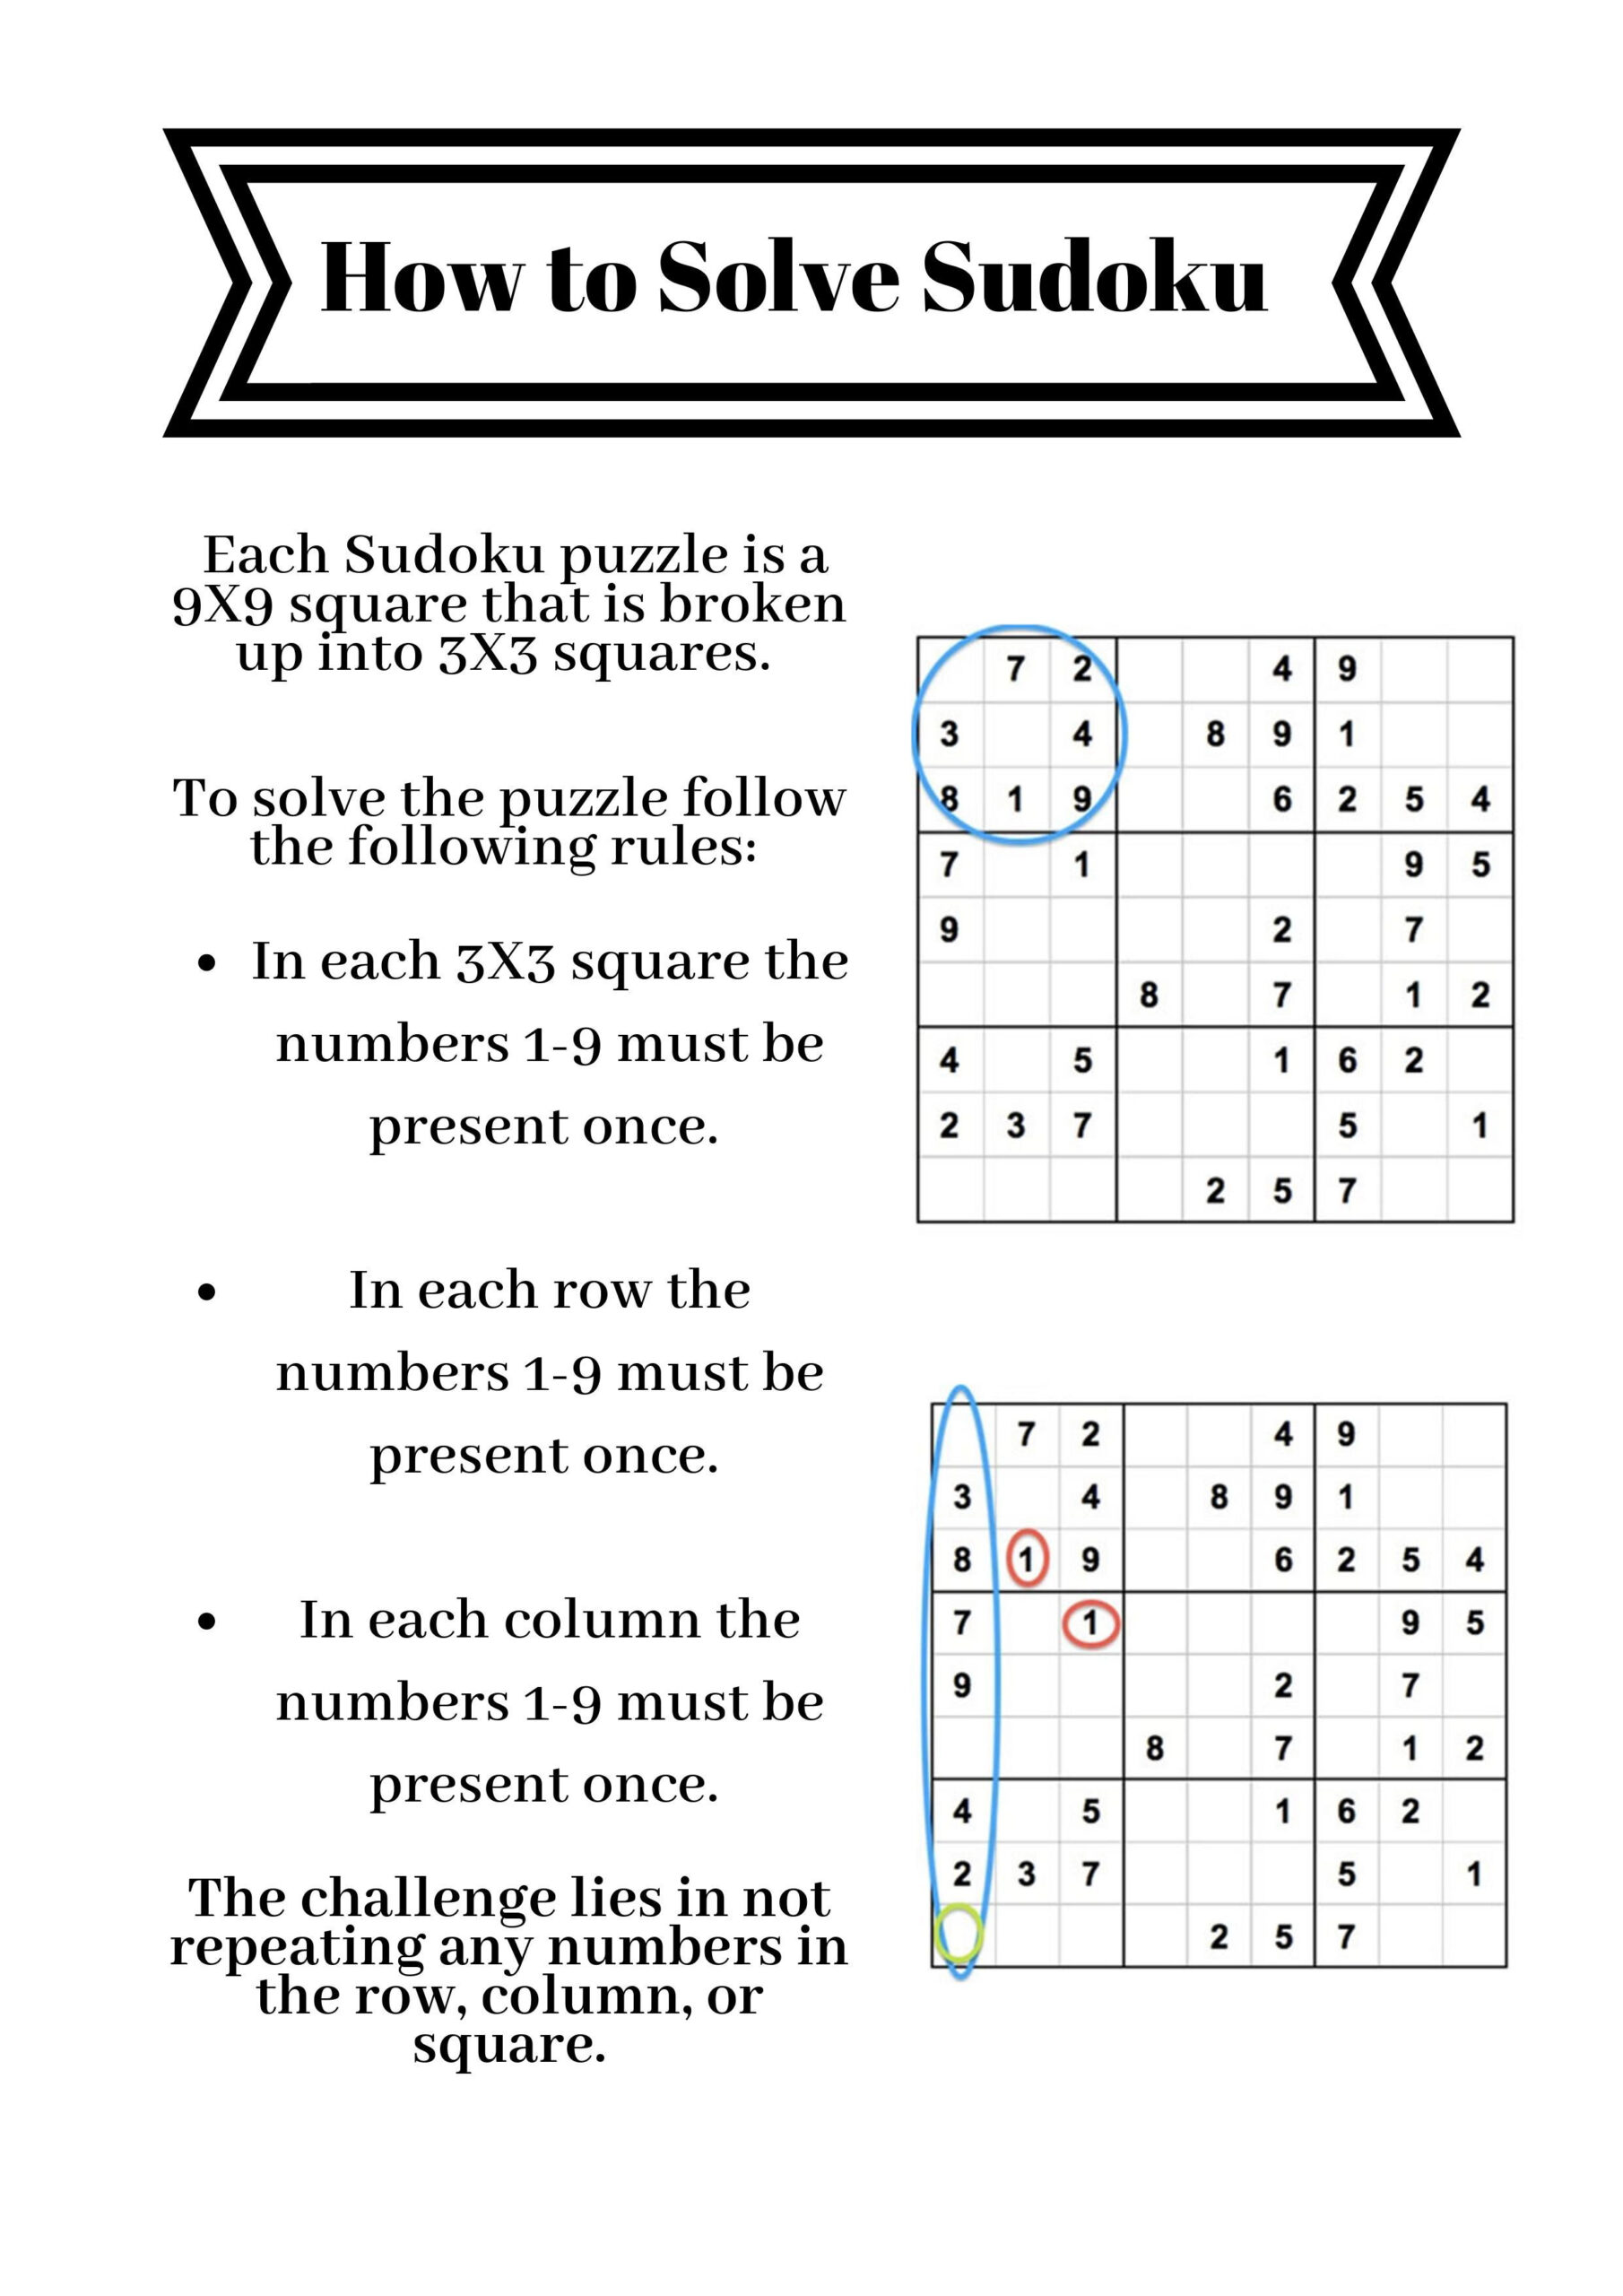 Easy To Follow Instructions For Solving Sudoku Puzzles Sudoku 